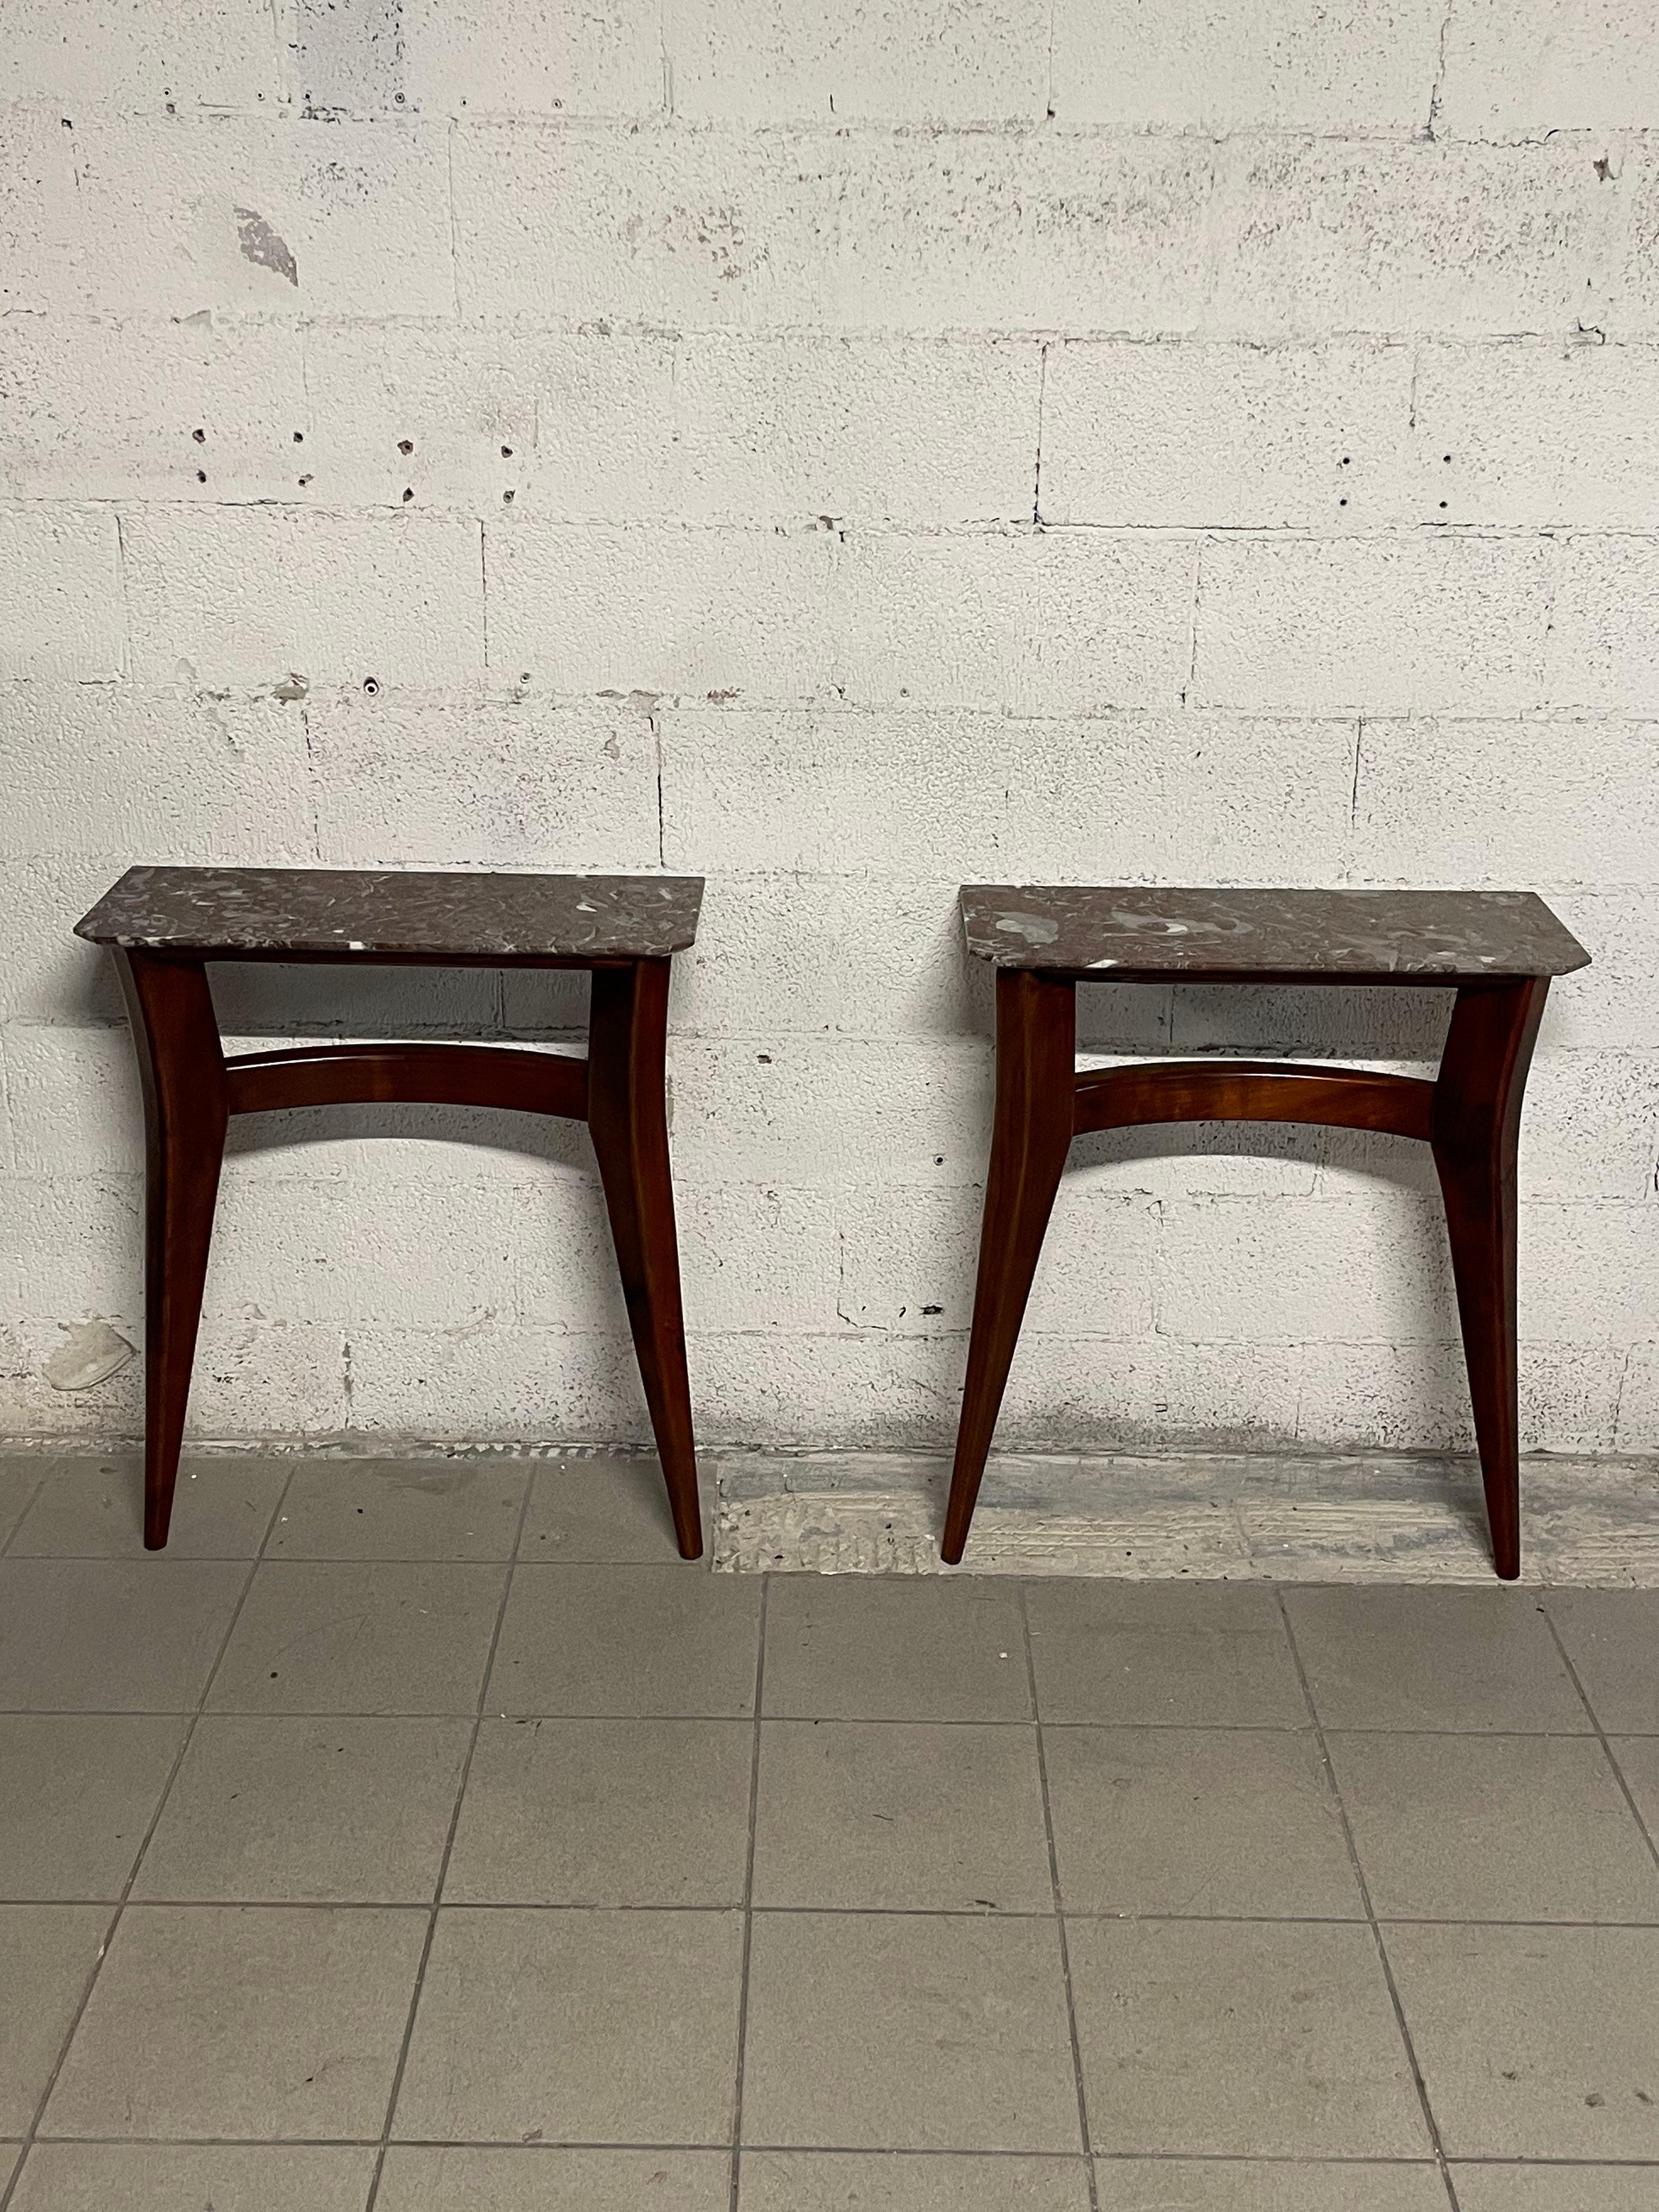 1960s cherry wood console table with marble top.
Fully restored.

They are sold separately although they can be just as interesting in pairs